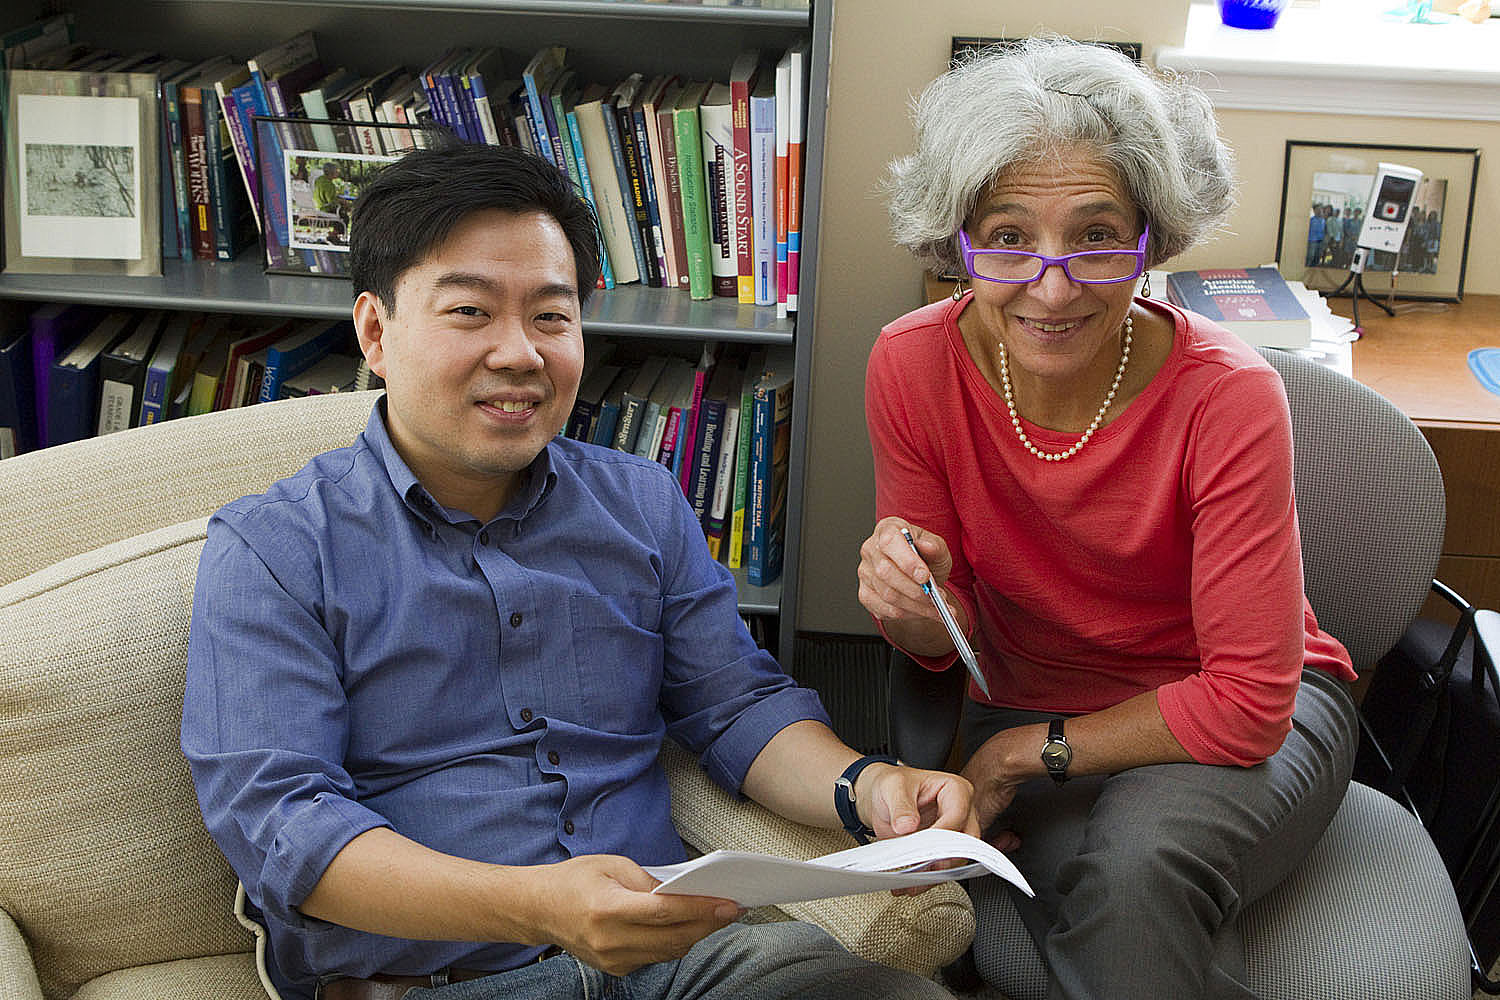 Francis Huang and Marcia Invernizzi sit in chairs working on a paper together look up and smile at the camera